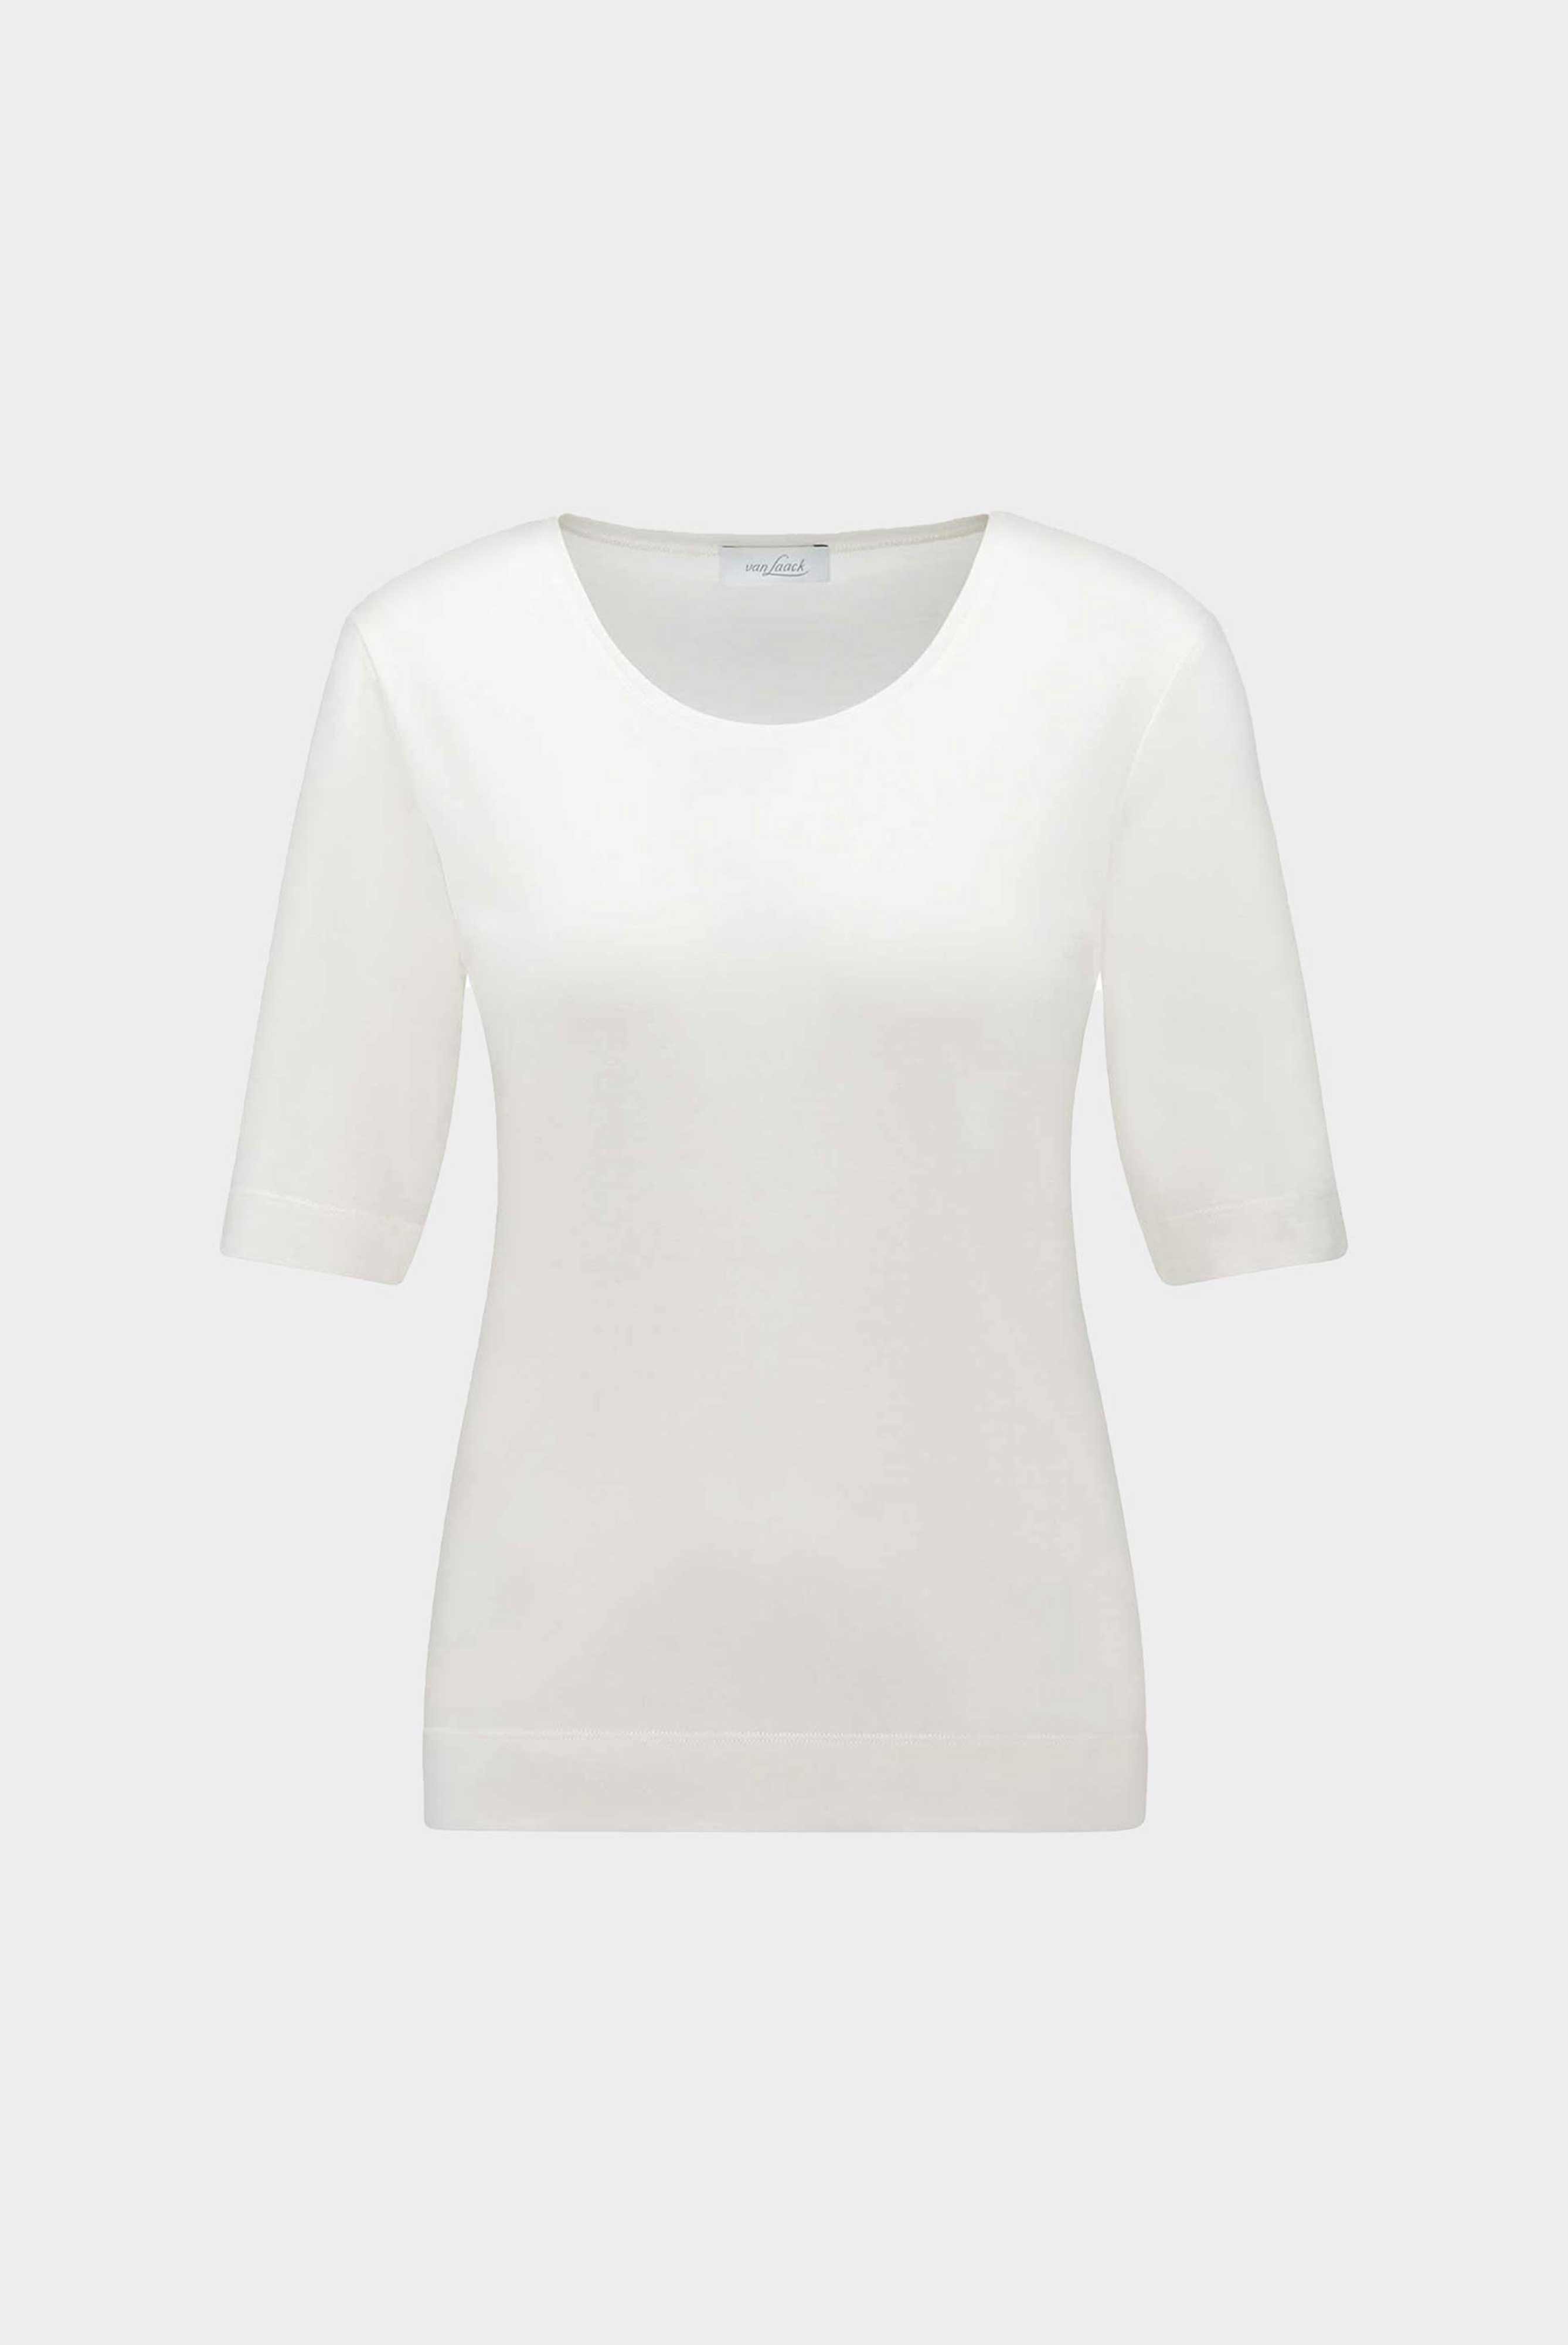 Tops & T-Shirts+Roundneck T-shirt with Silk+07.2122..Z20090.100.32